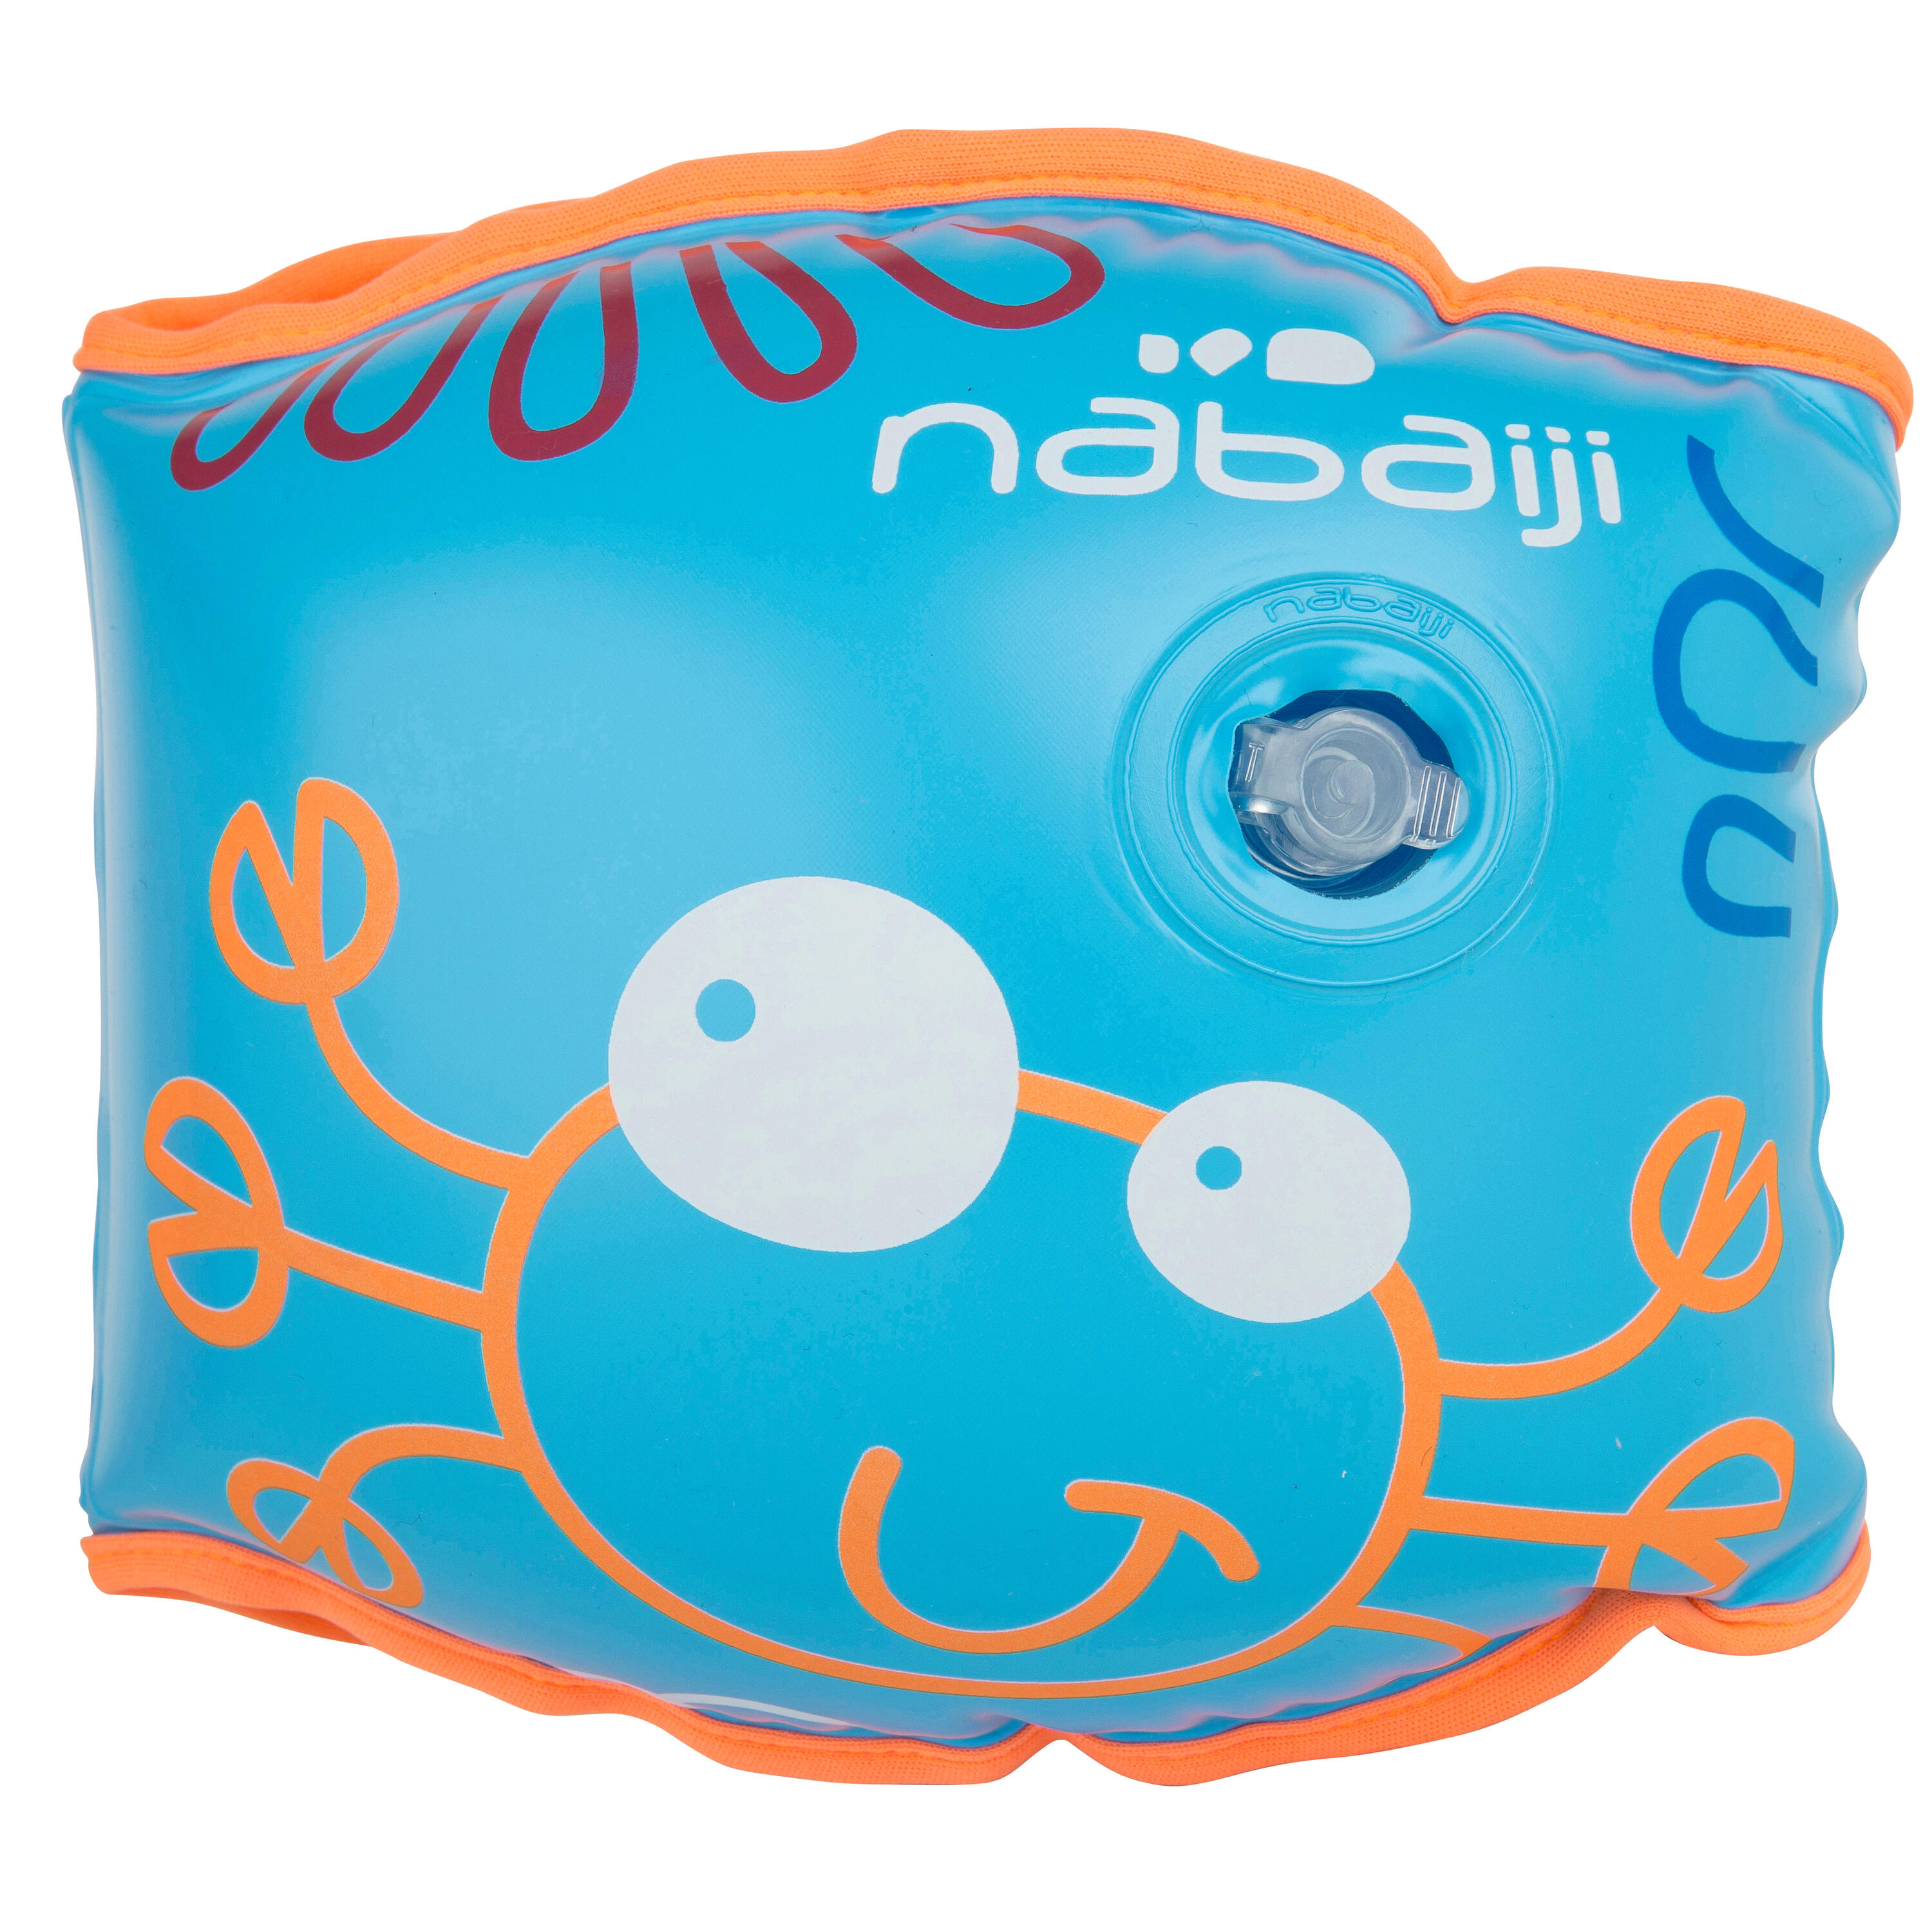 NABAIJI Soft Armbands With Two Inflation Chambers With "Sea" Print 15 To 30kg